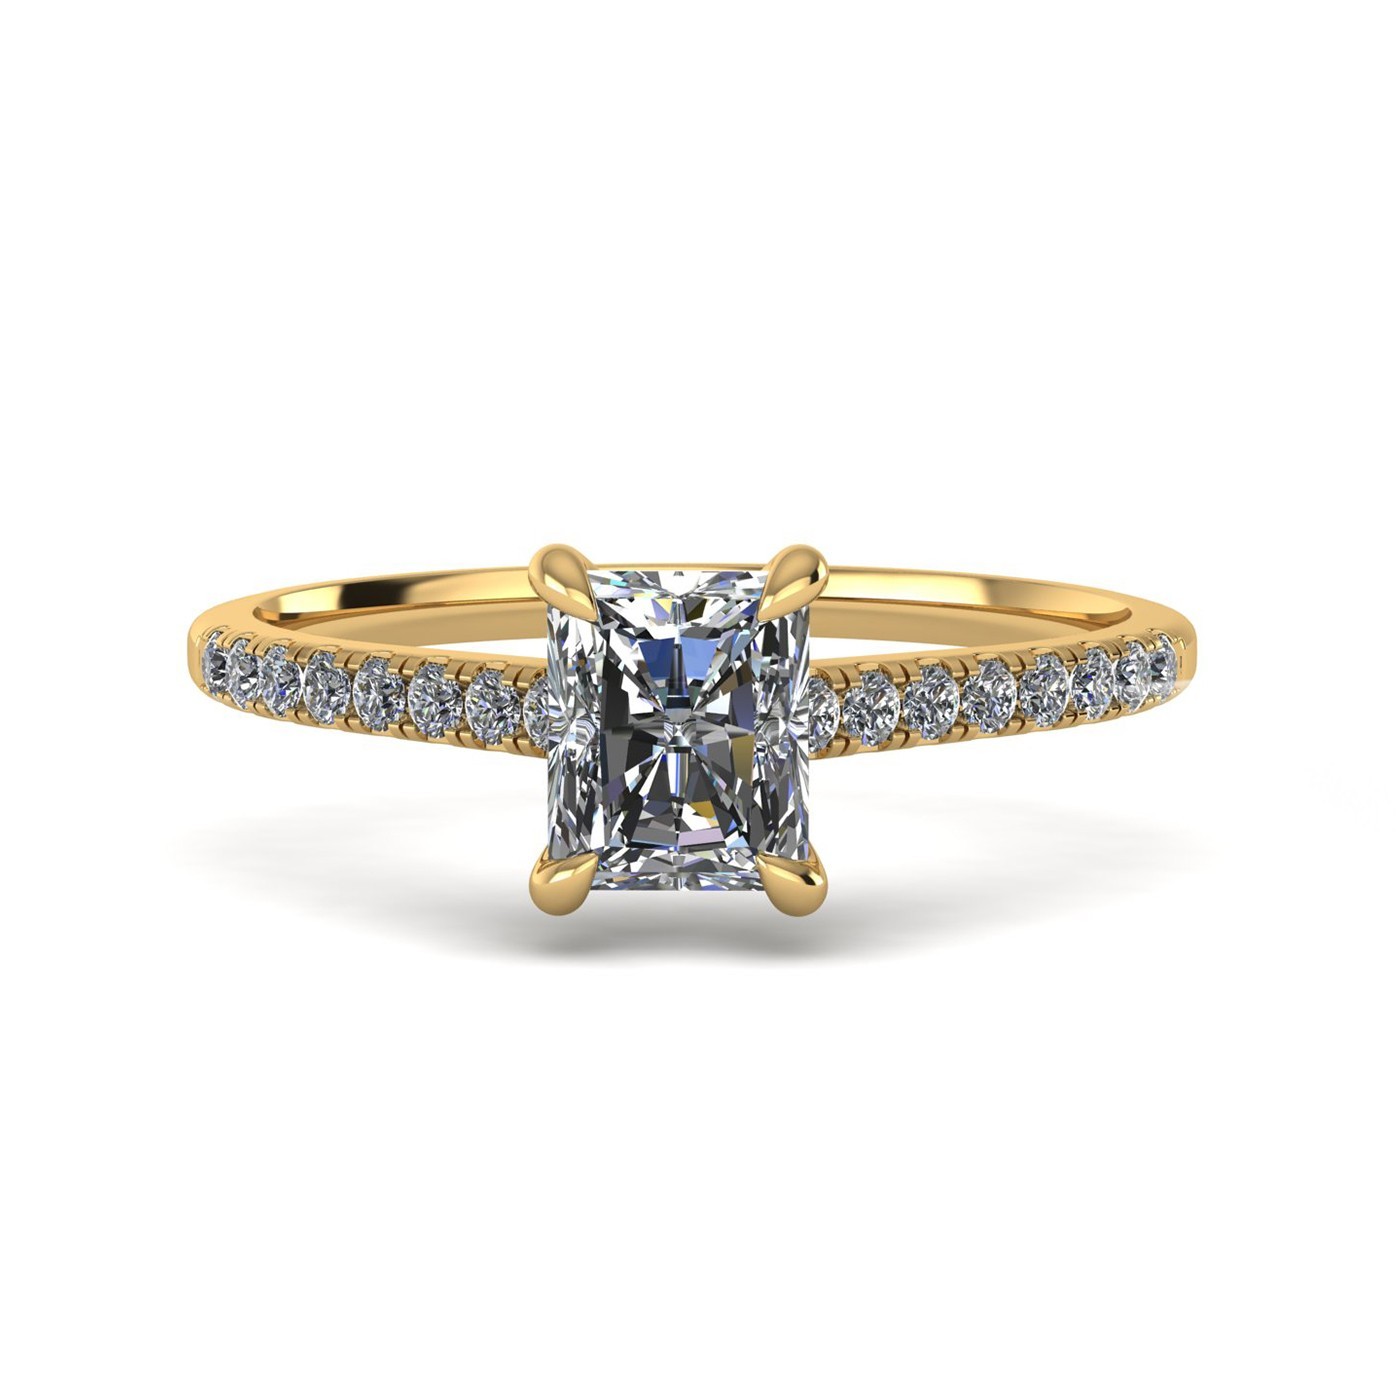 18k yellow gold  0,80 ct 4 prongs radiant cut diamond engagement ring with whisper thin pavÉ set band Photos & images